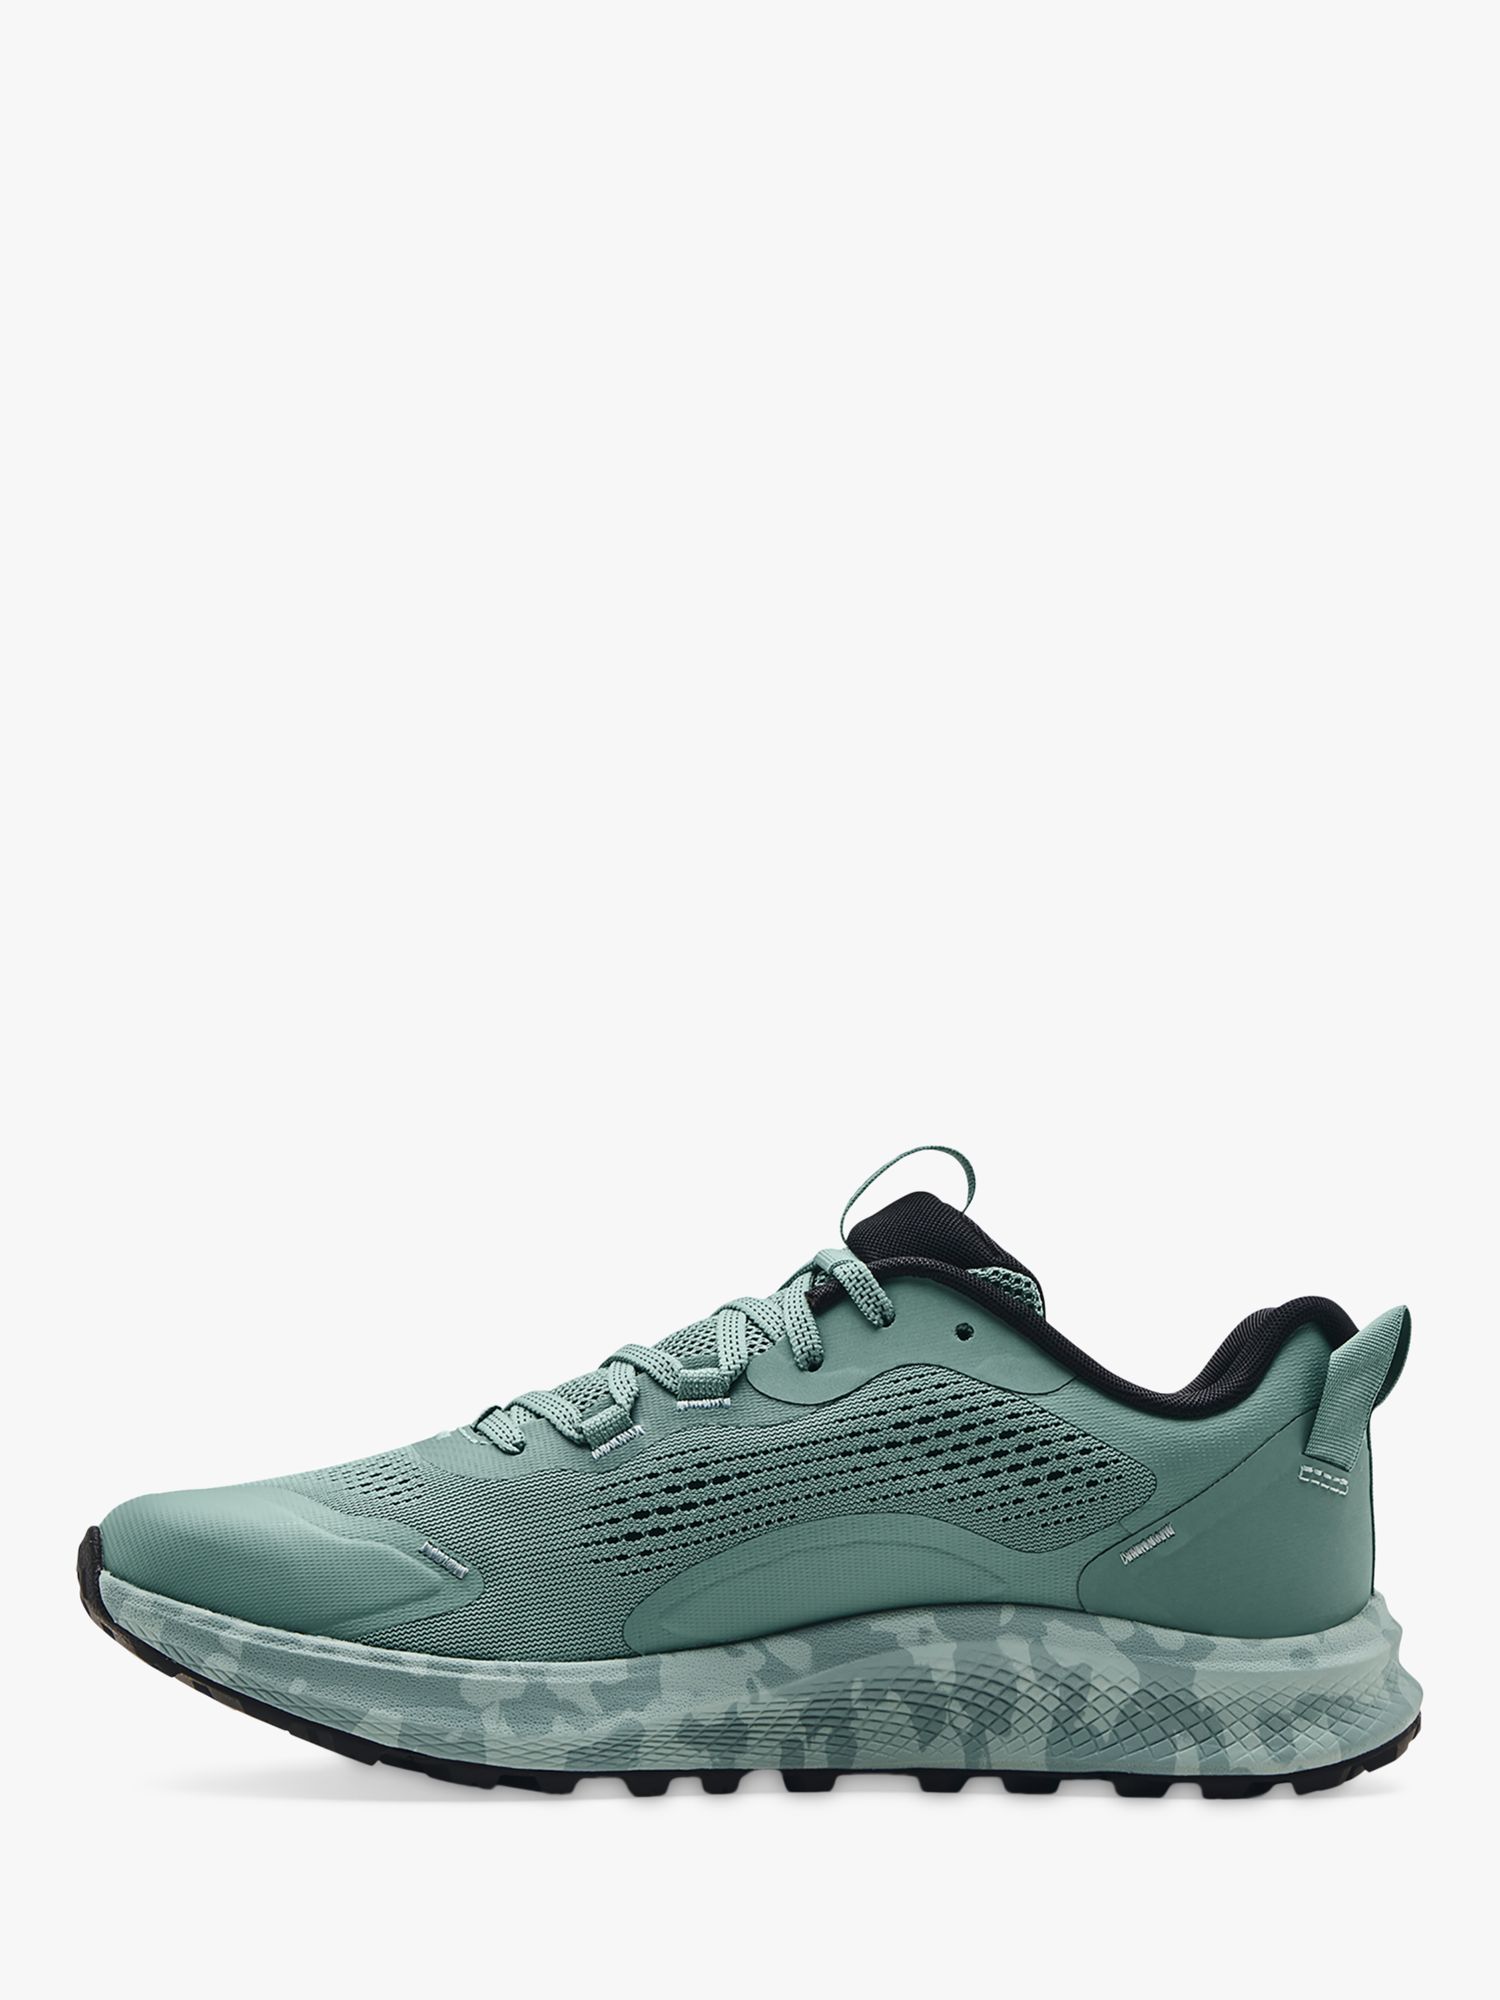 Under Armour Charged Bandit 2 Men's Trail Running Shoes, Fresco Green/Black at John Lewis Partners